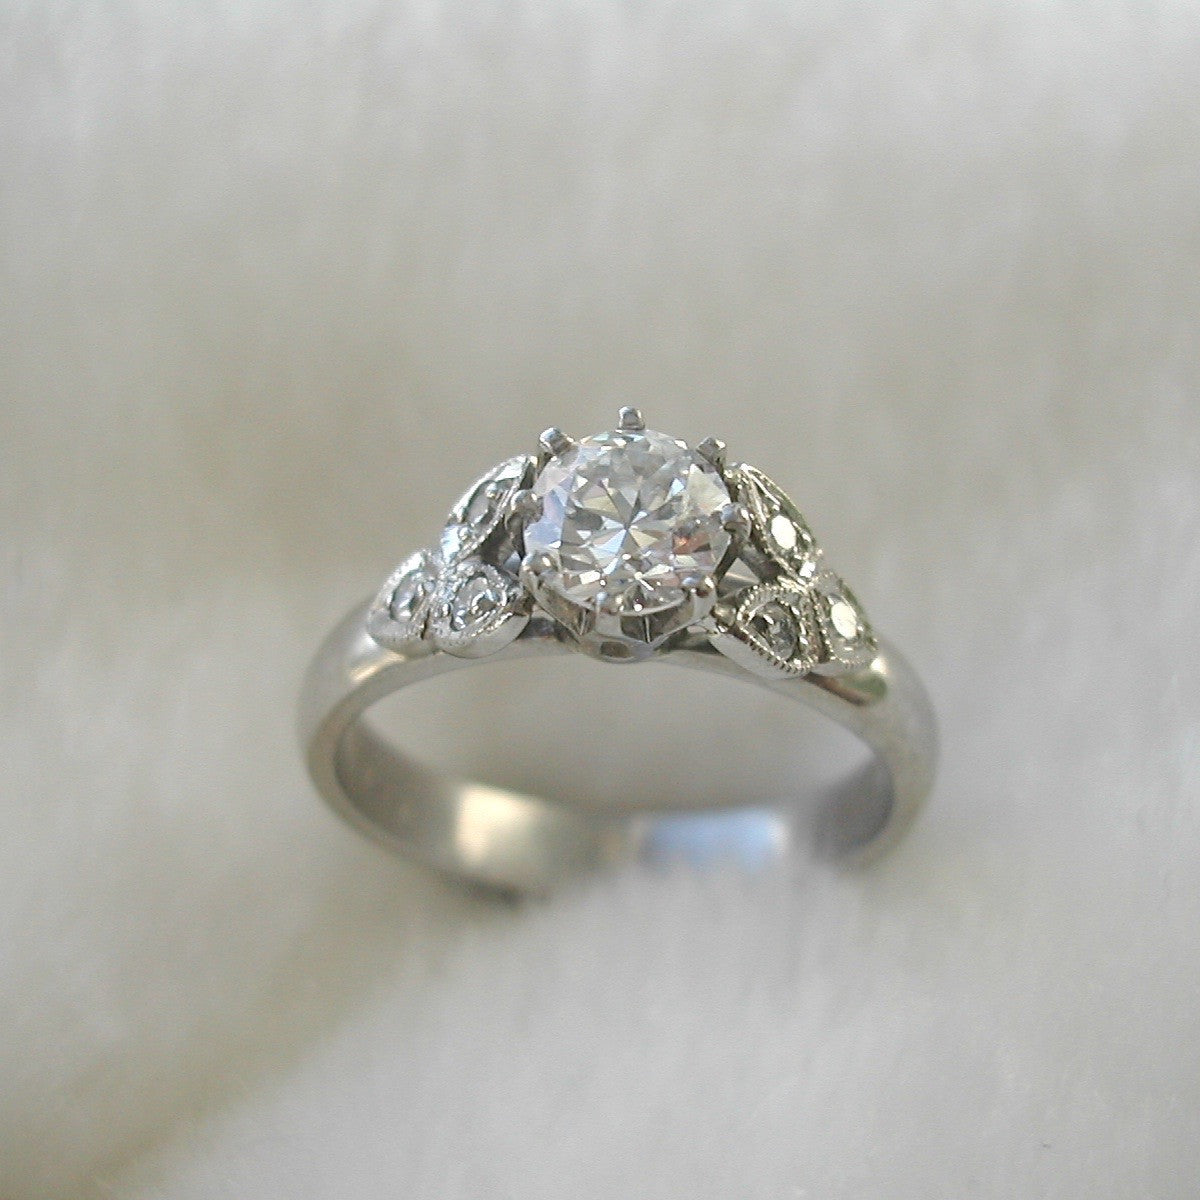 Home Products Vintage Style Custom Handmade Engagement Ring 2844